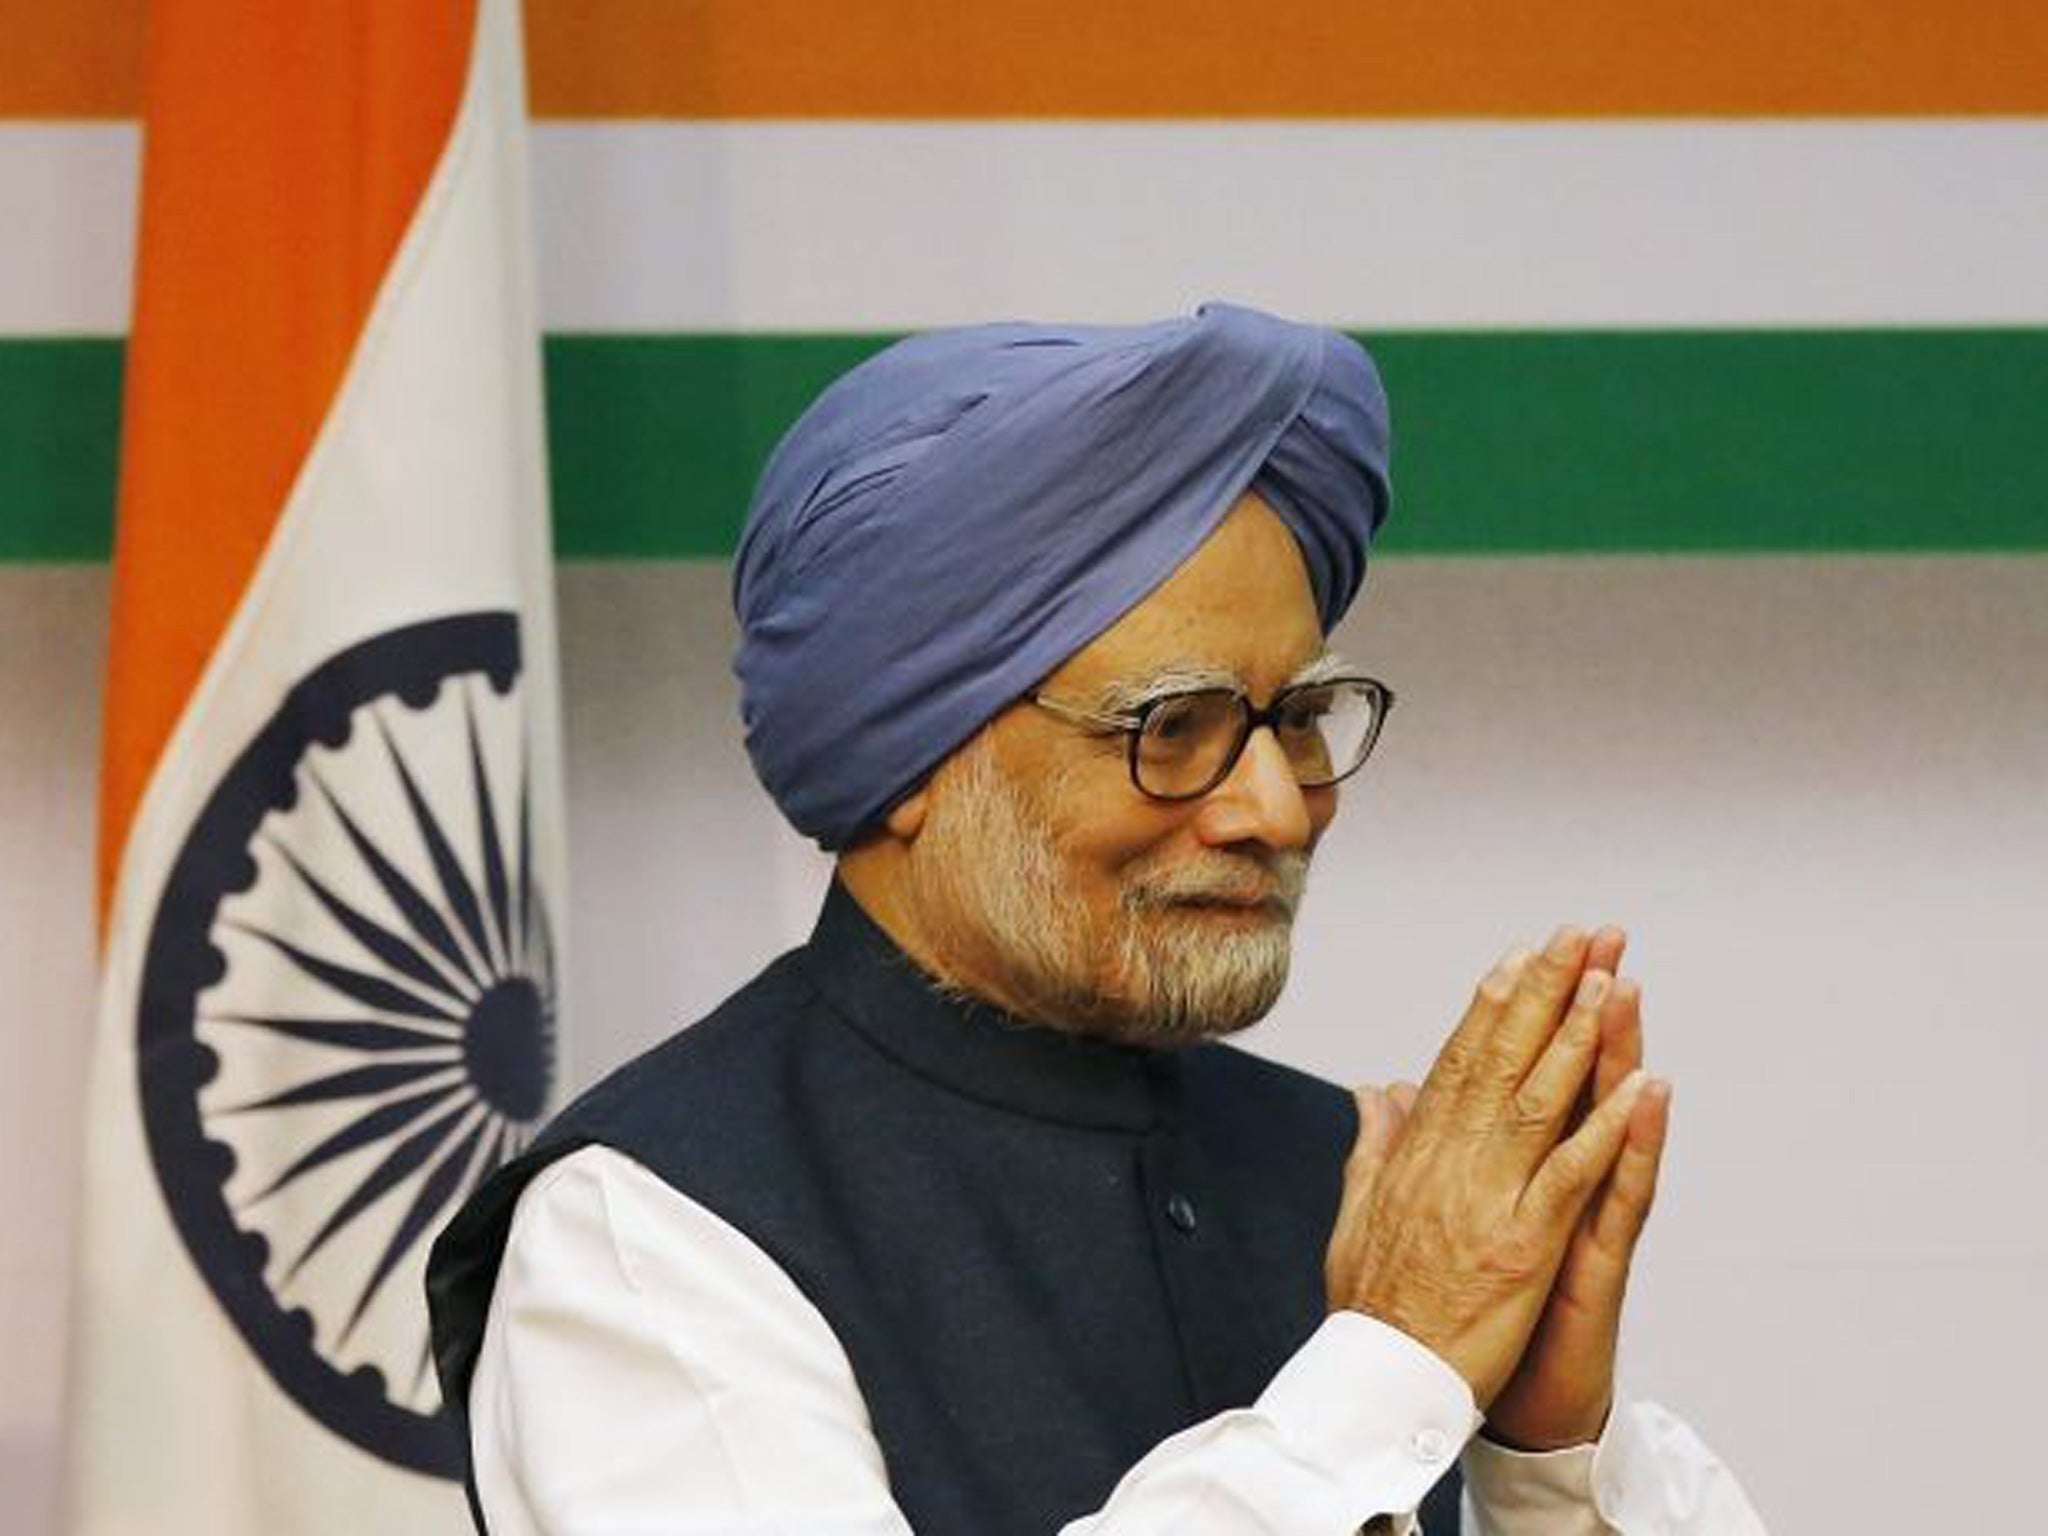 The Indian Prime Minster Manmohan Singh says he will step aside after 10 years in office